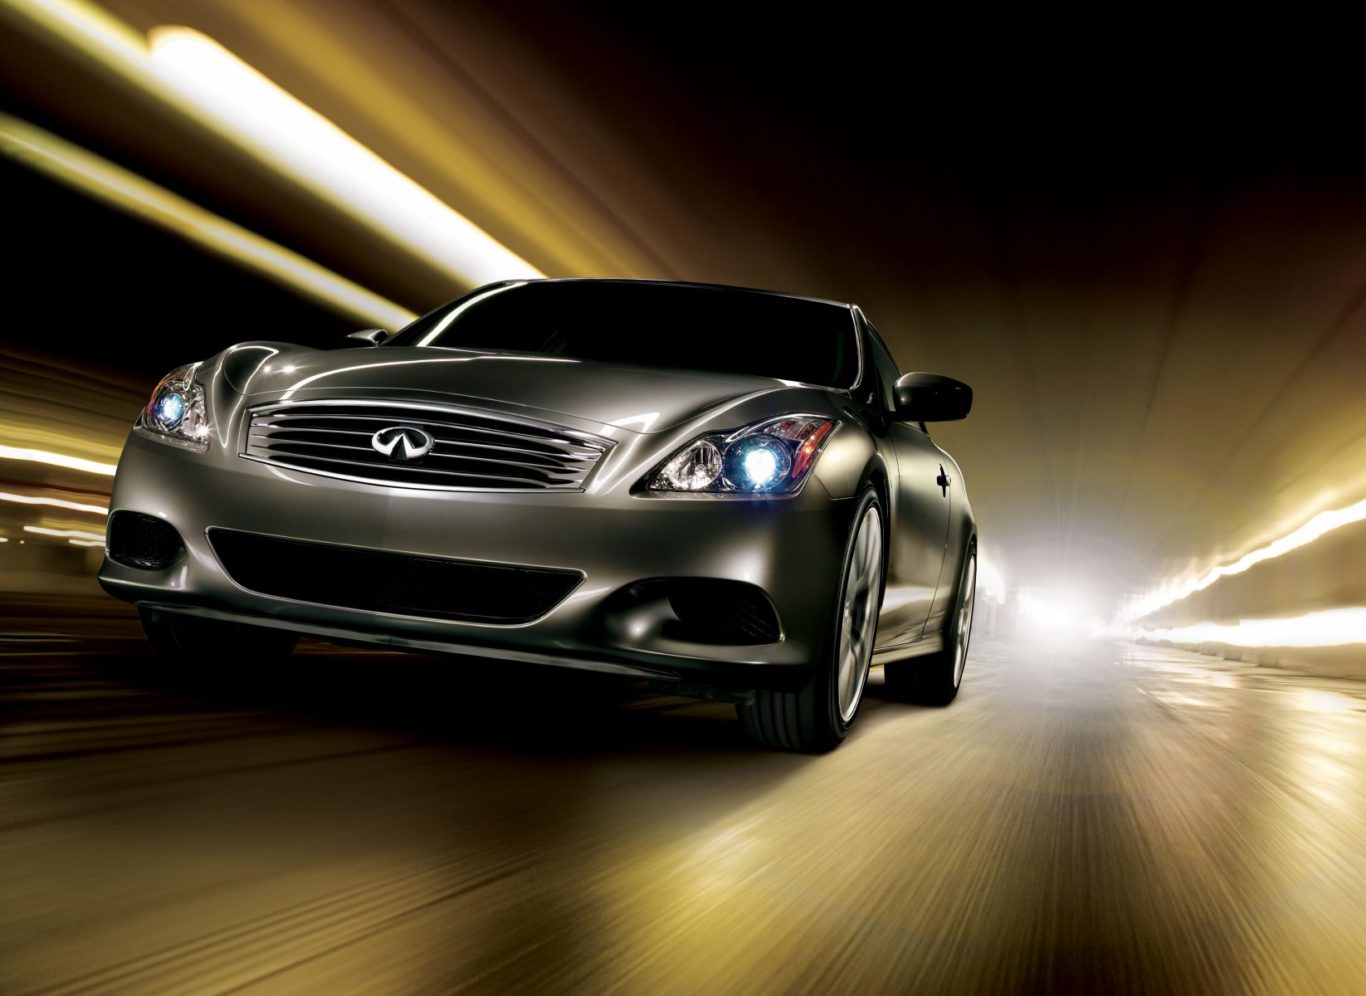 The G37 was Infiniti's rival to the BMW M3